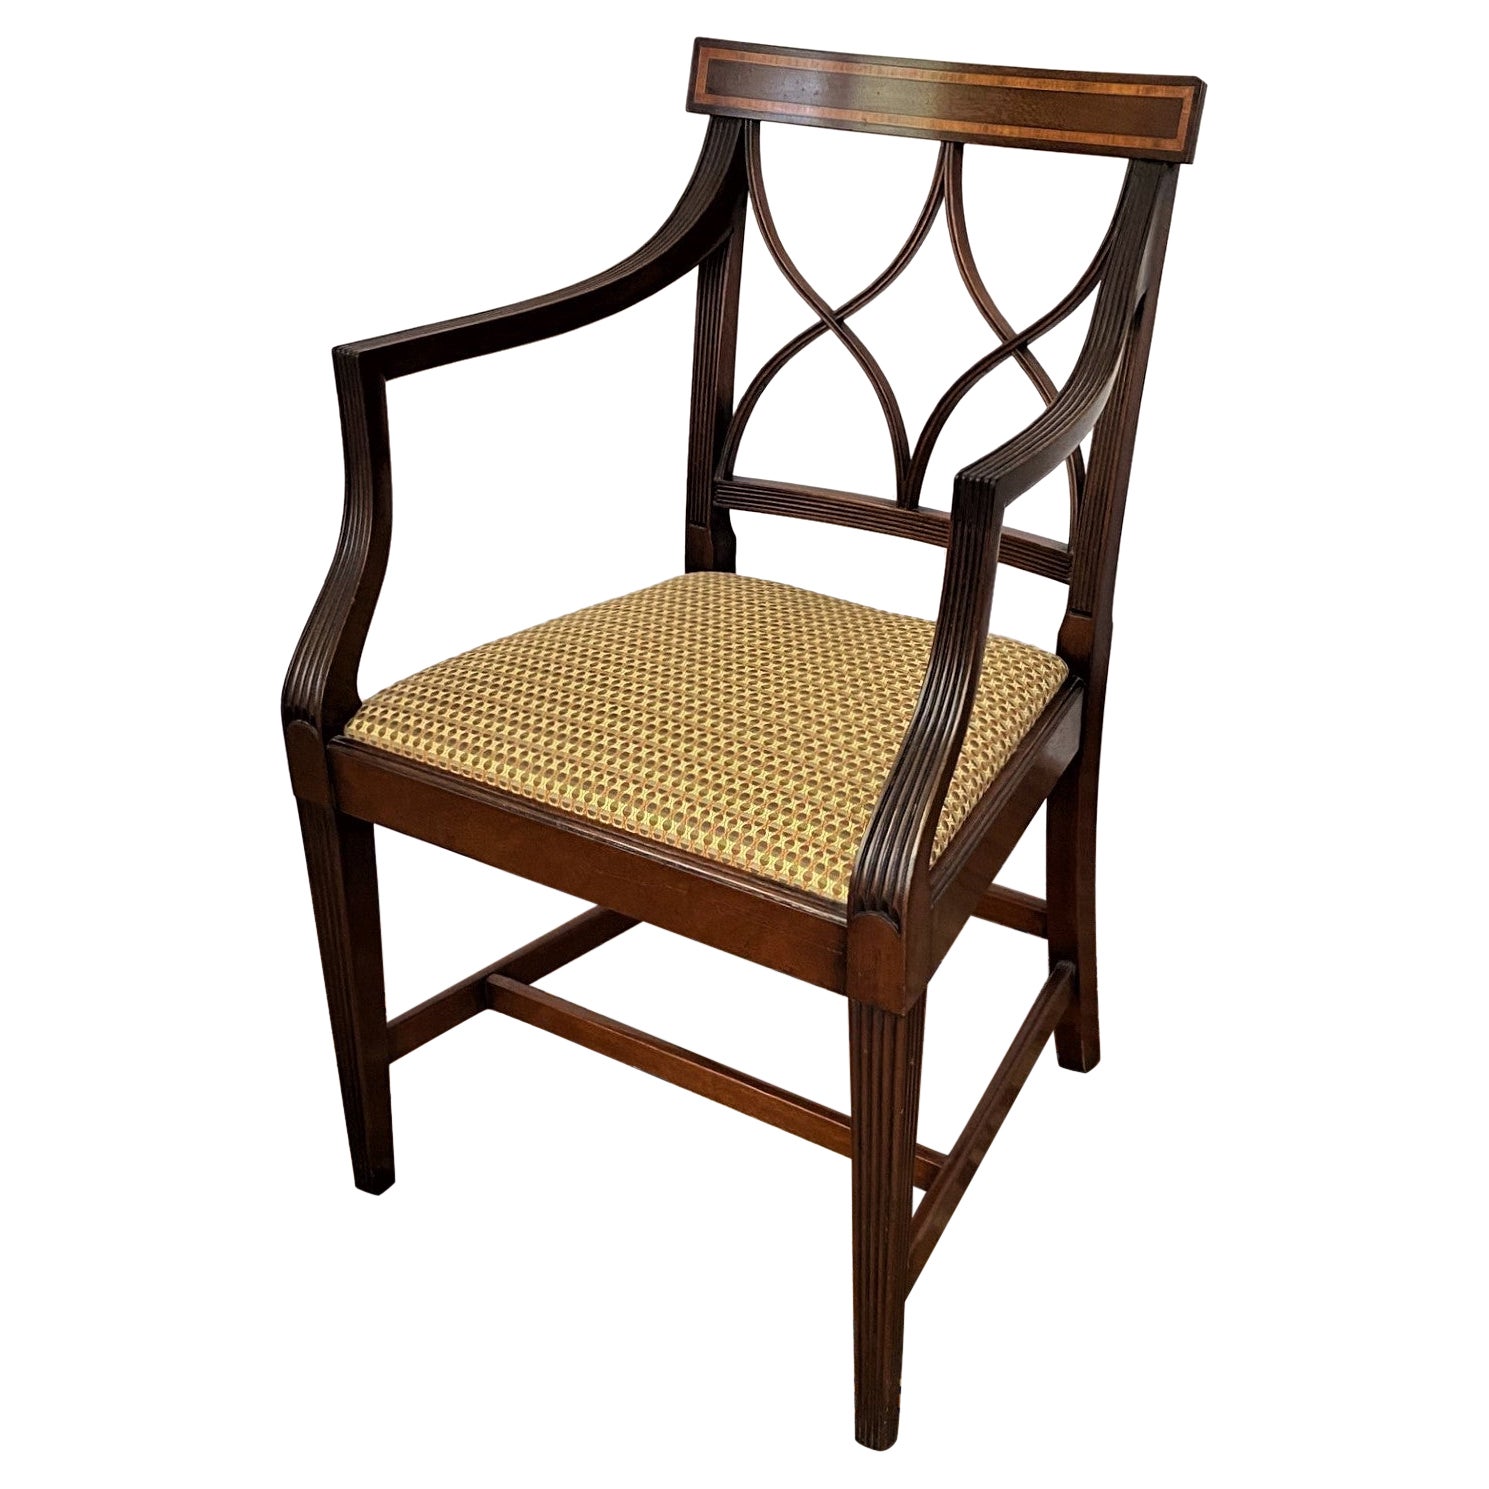 English-Made Sheraton Style Mahogany Armchair with Tulipwood Inaly. In Stock